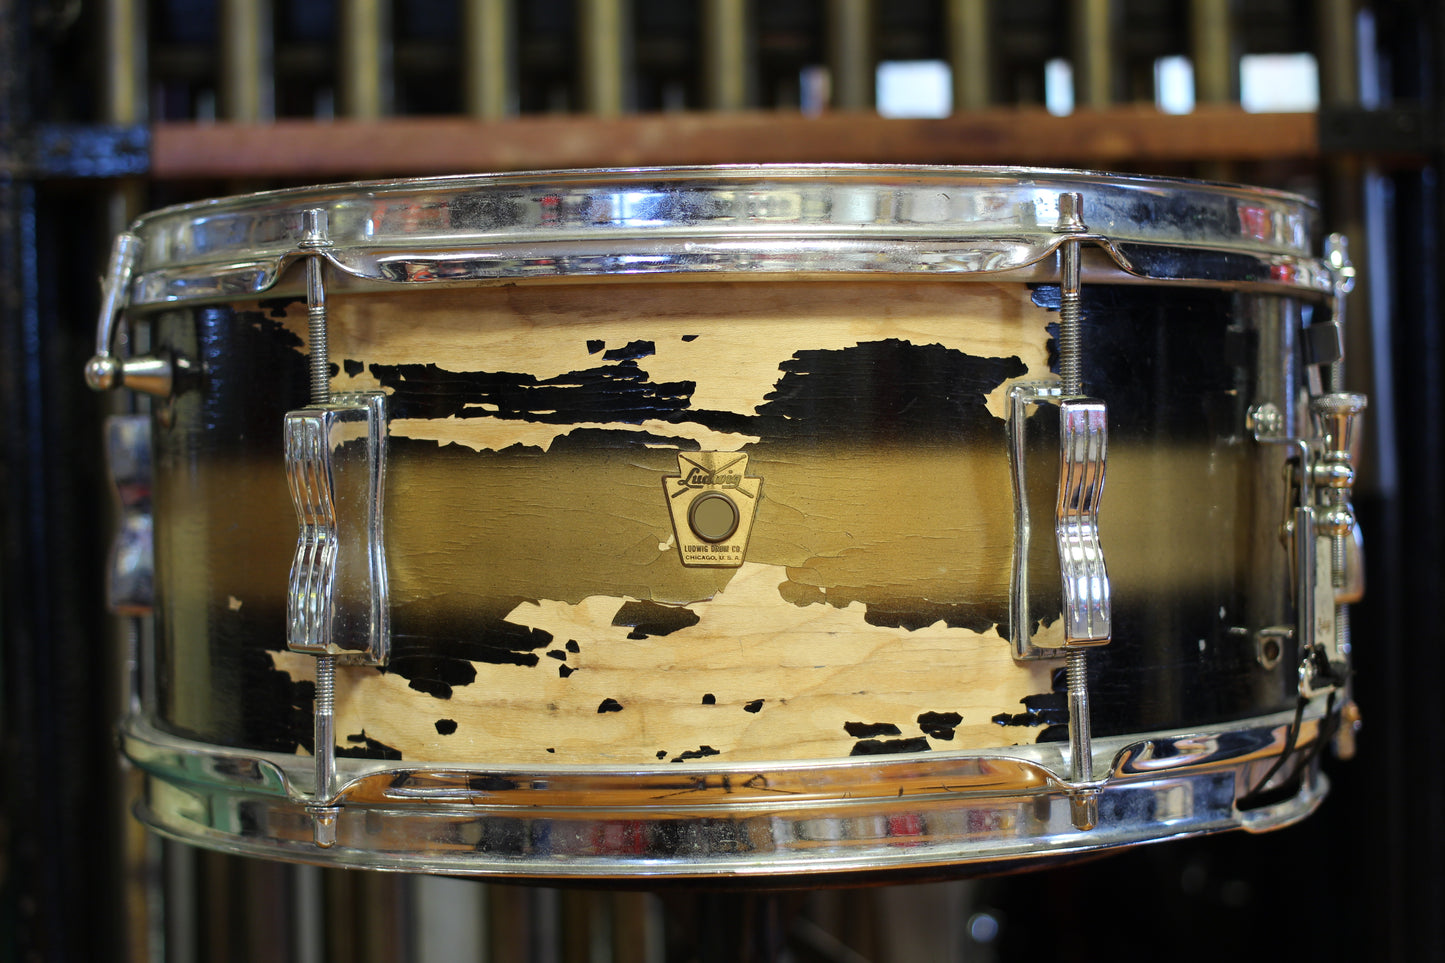 1962 Ludwig Pioneer Snare Drum 6.5"x14" in Black & Gold Duco